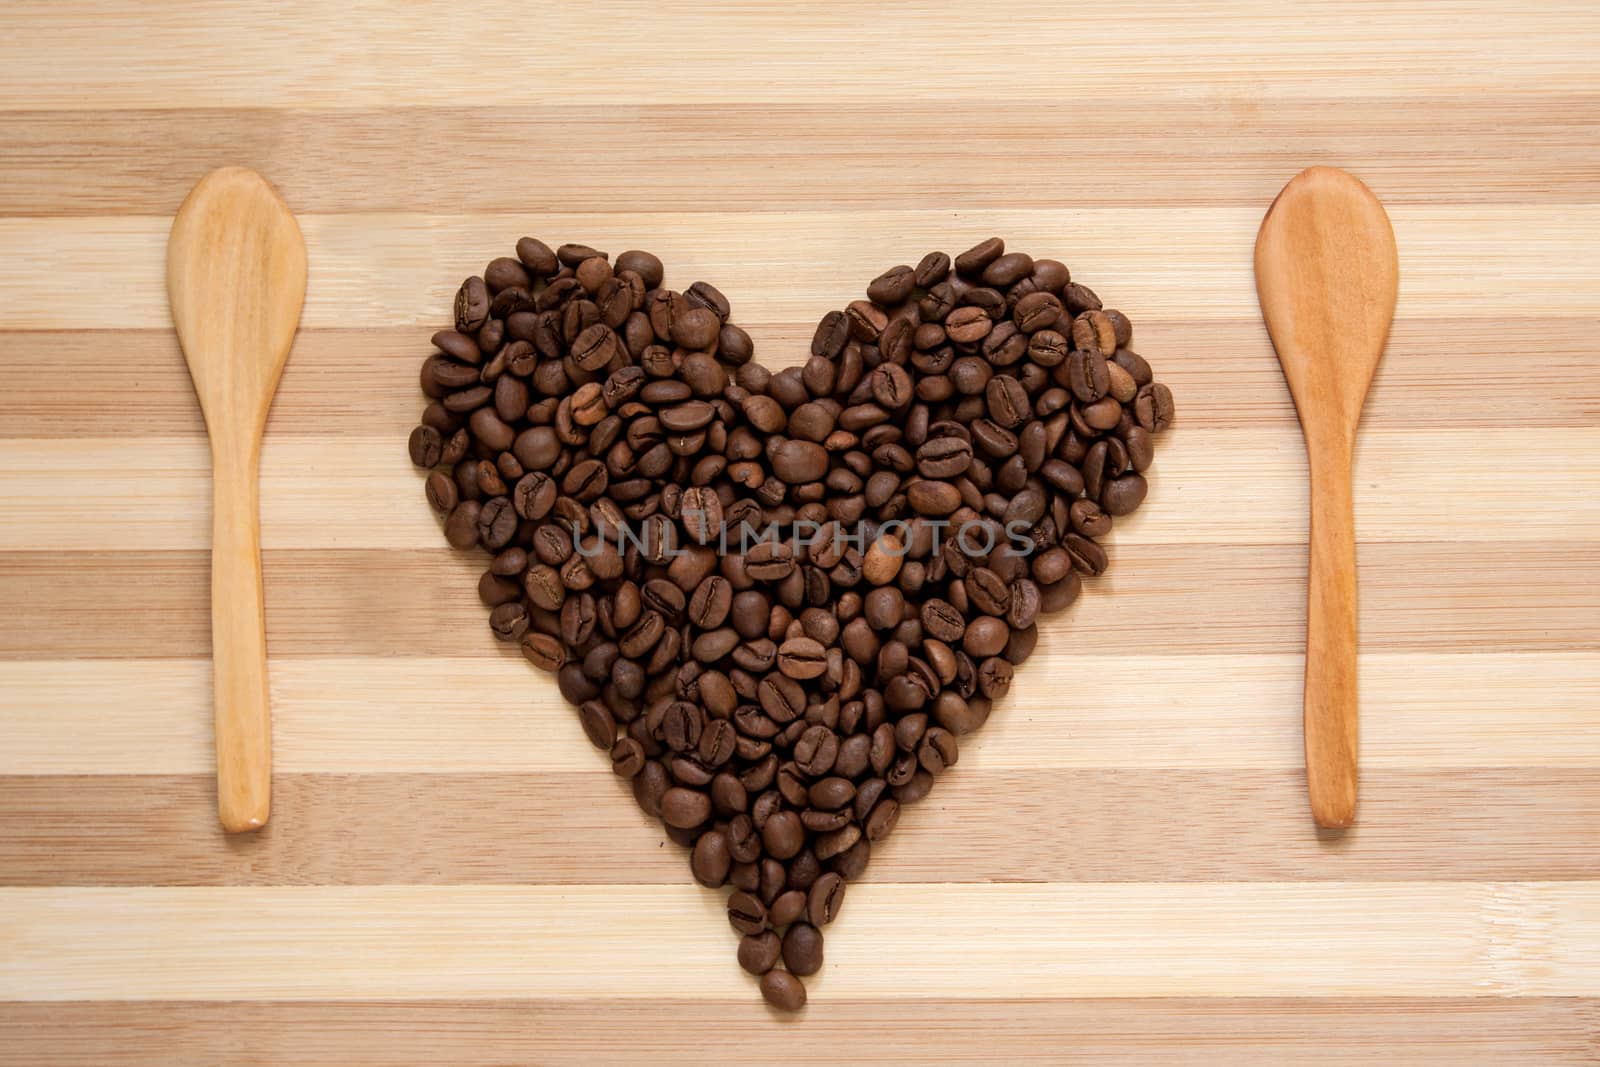 Heart of coffee beans with wooden spoons on wooden board.